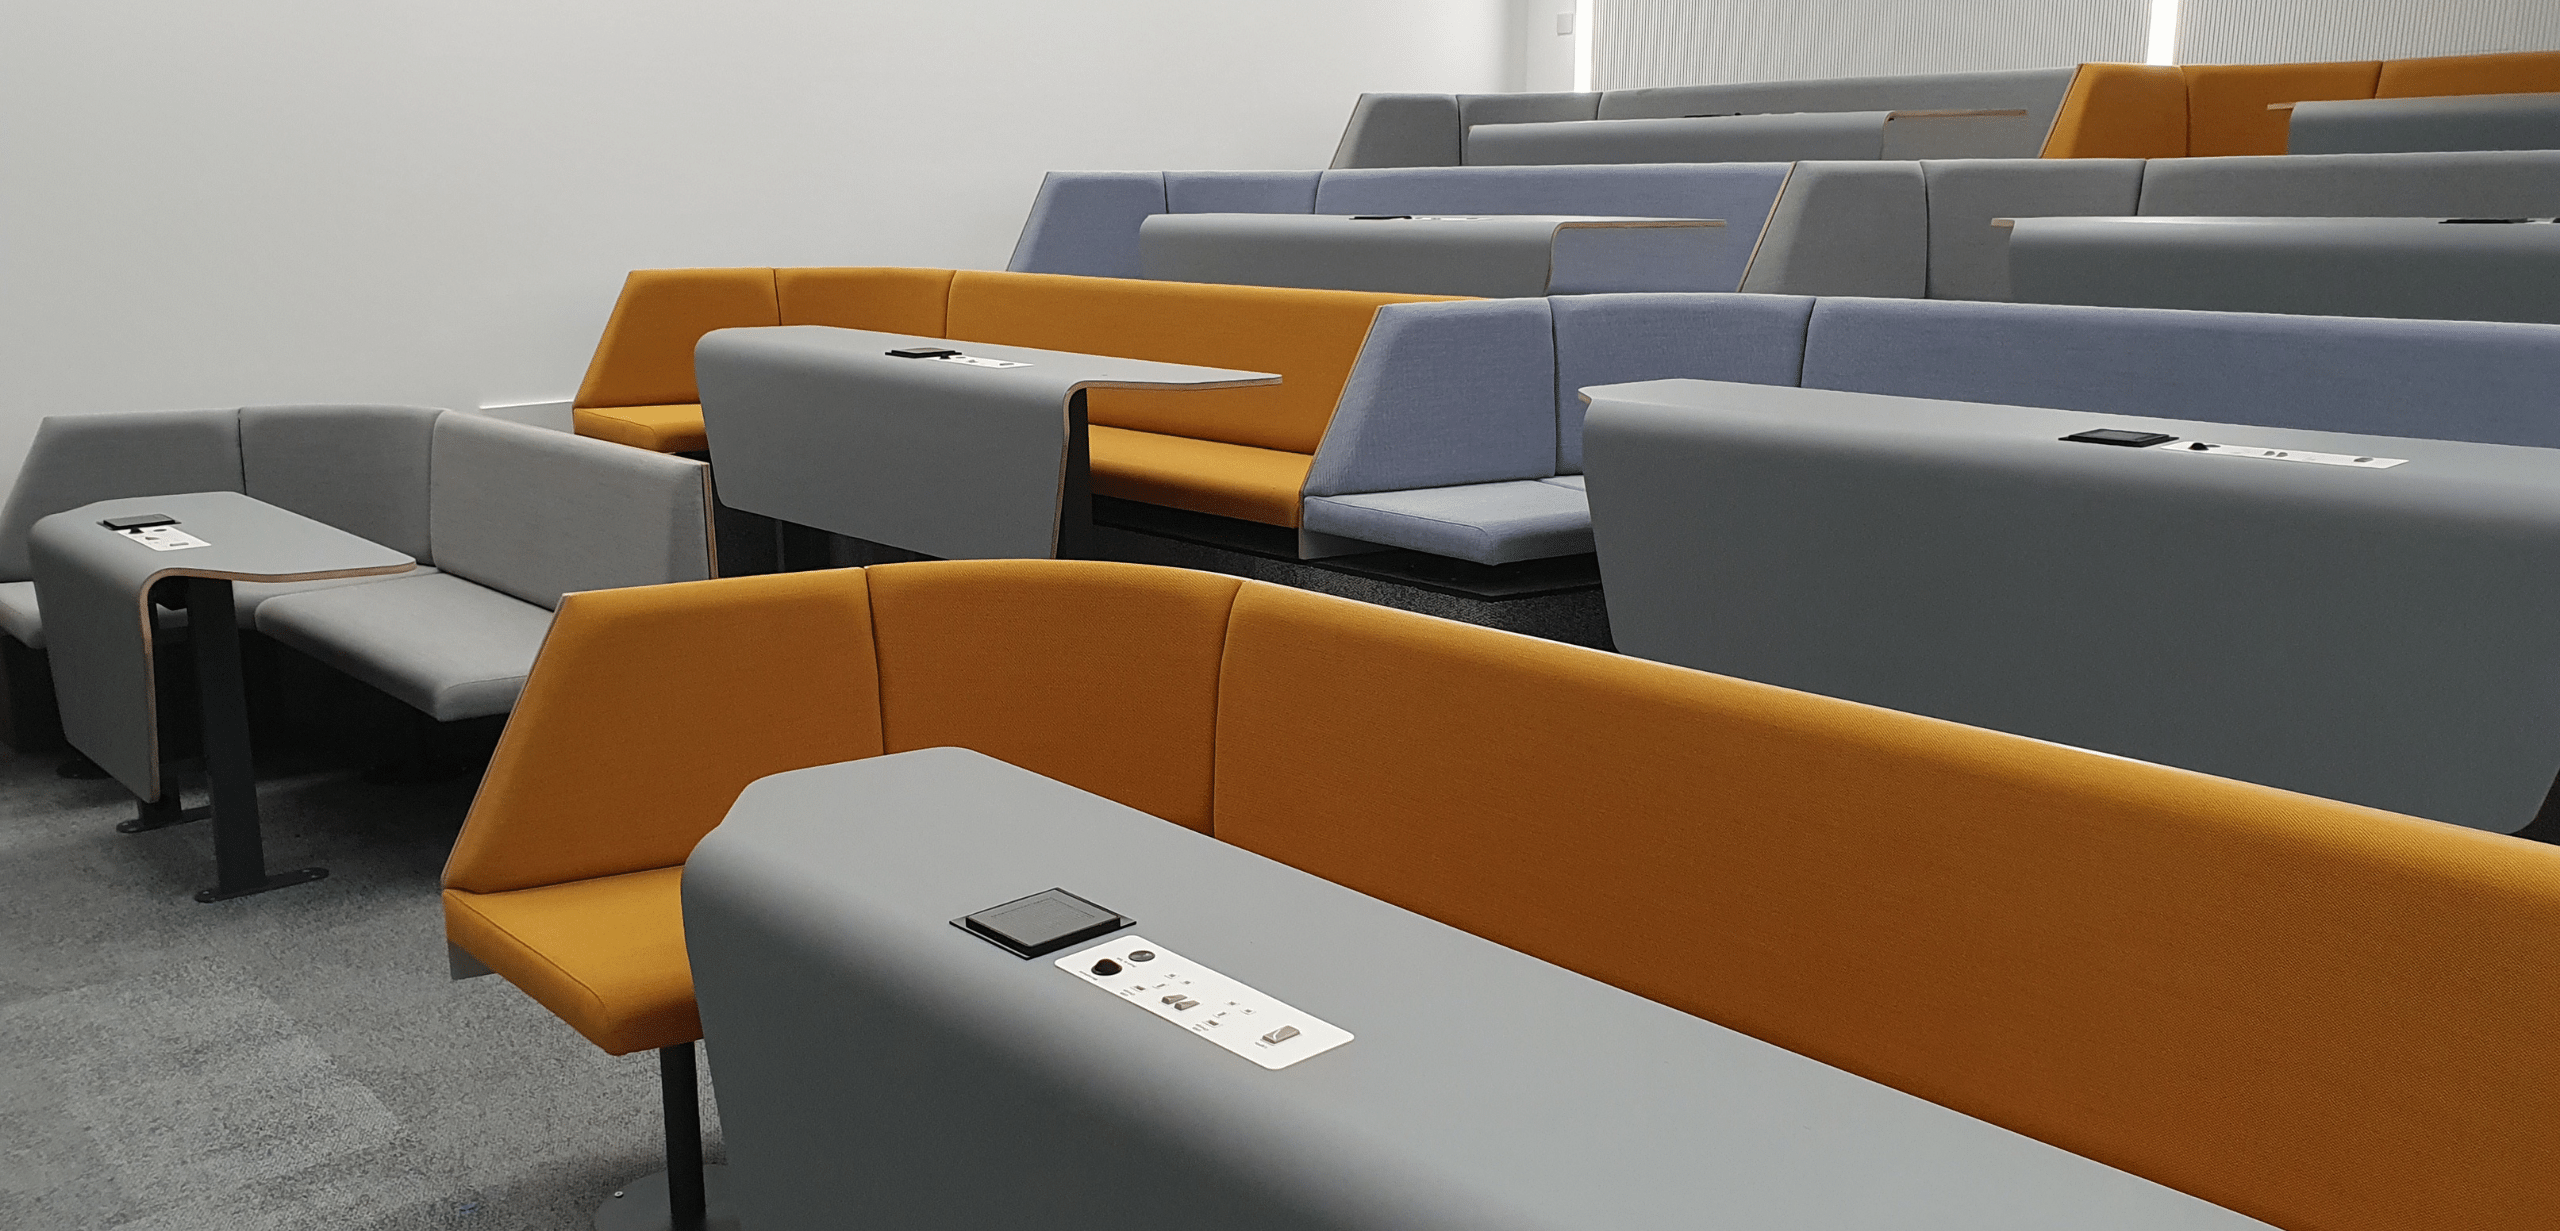 A lecture room with orange and yellow lecture hall seating